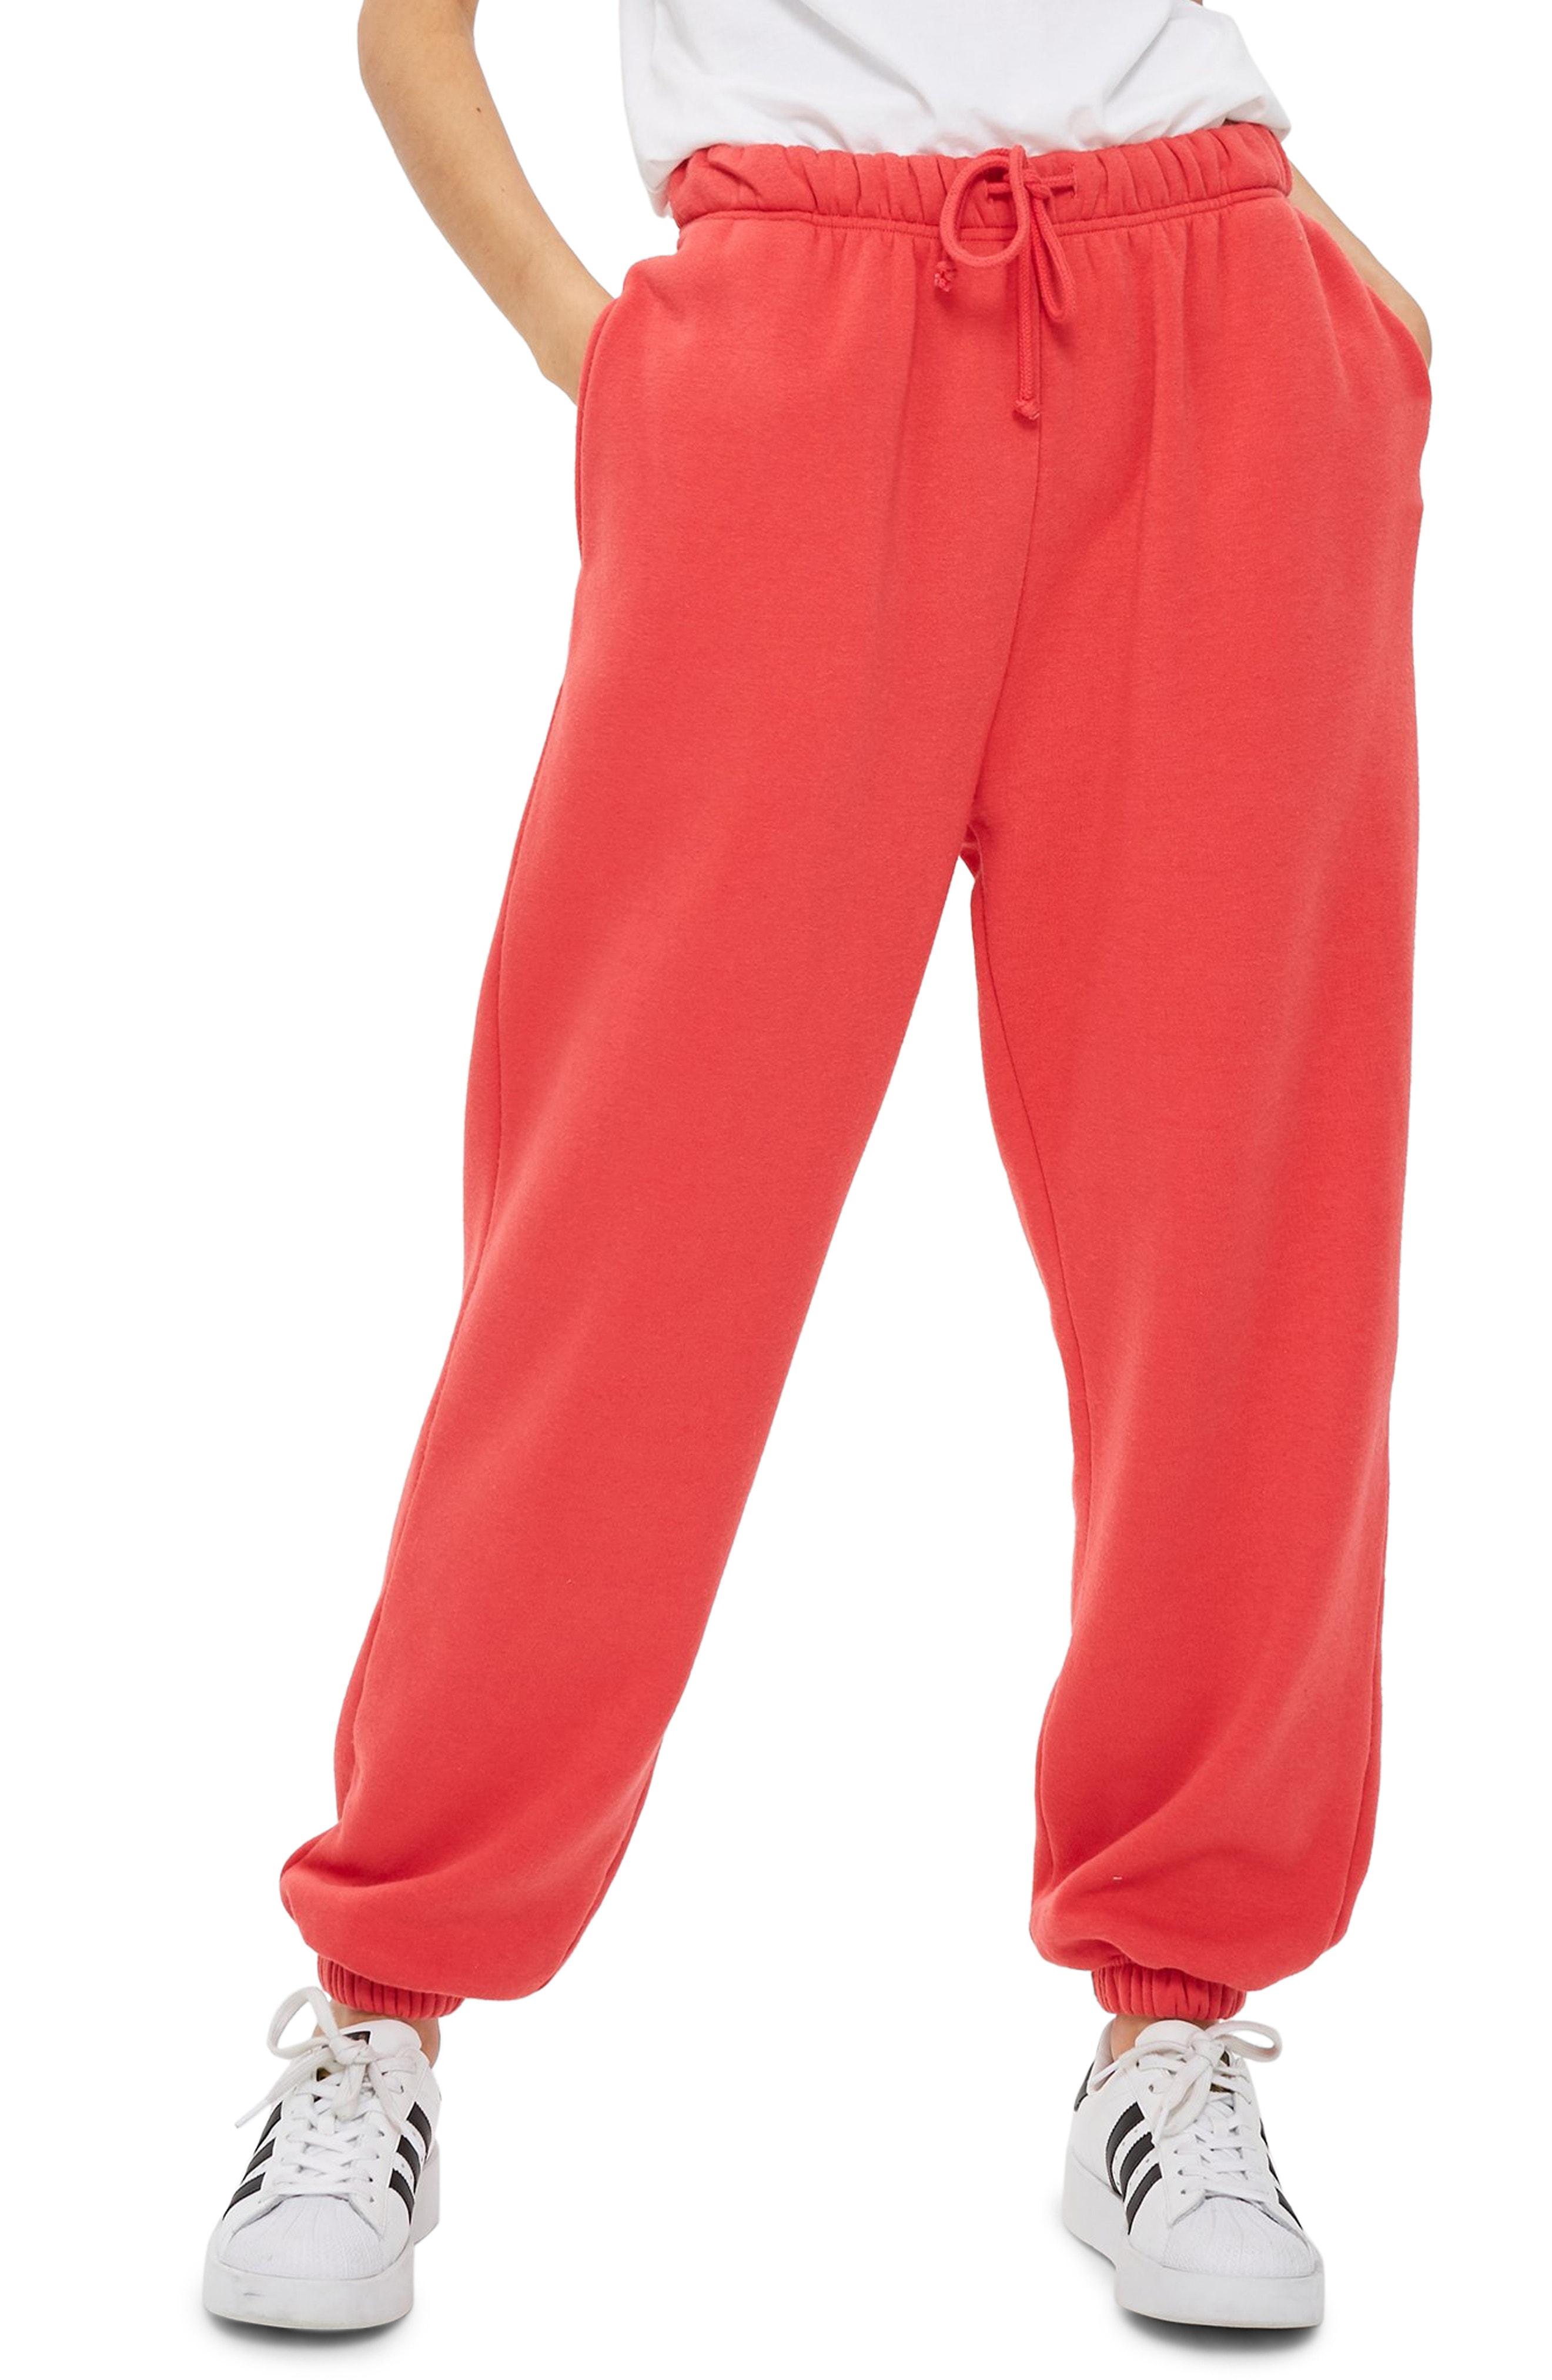 Topshop Bertie Oversized Joggers Hot Sale, UP TO 62% OFF |  www.realliganaval.com